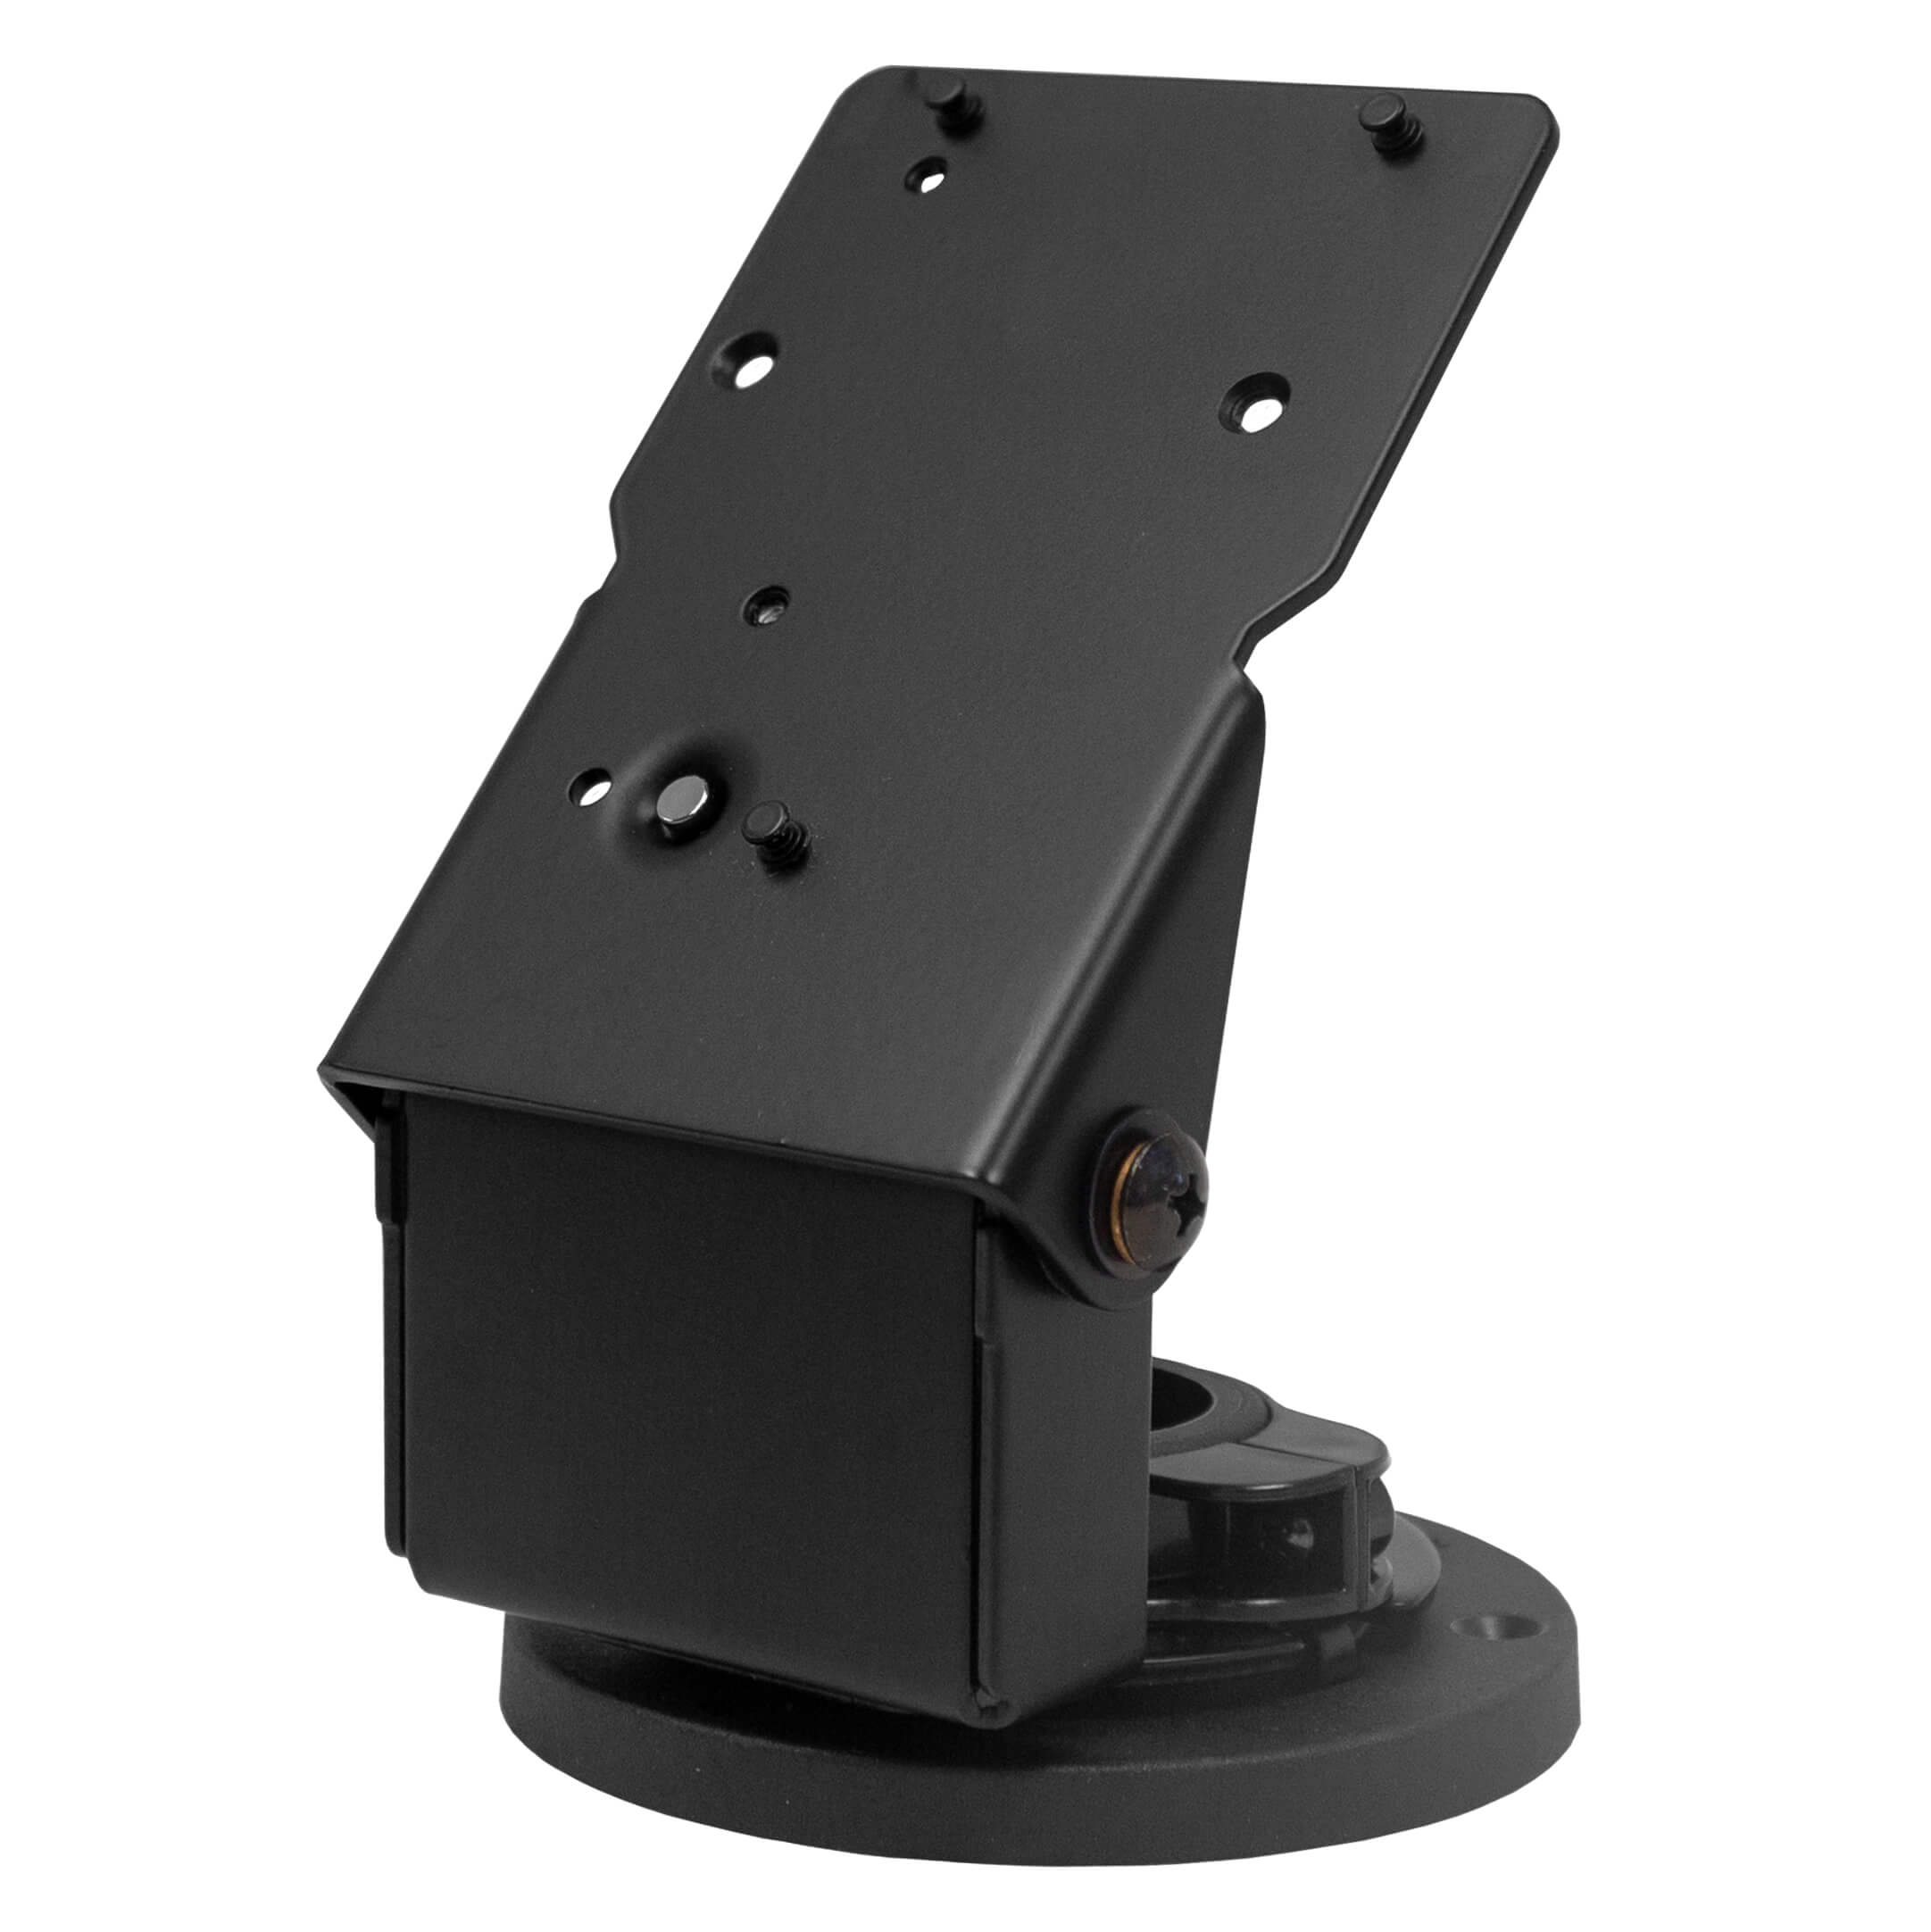 Round Base Metal Stand with EMV Card Clearance for Verifone M400 Payment Terminals